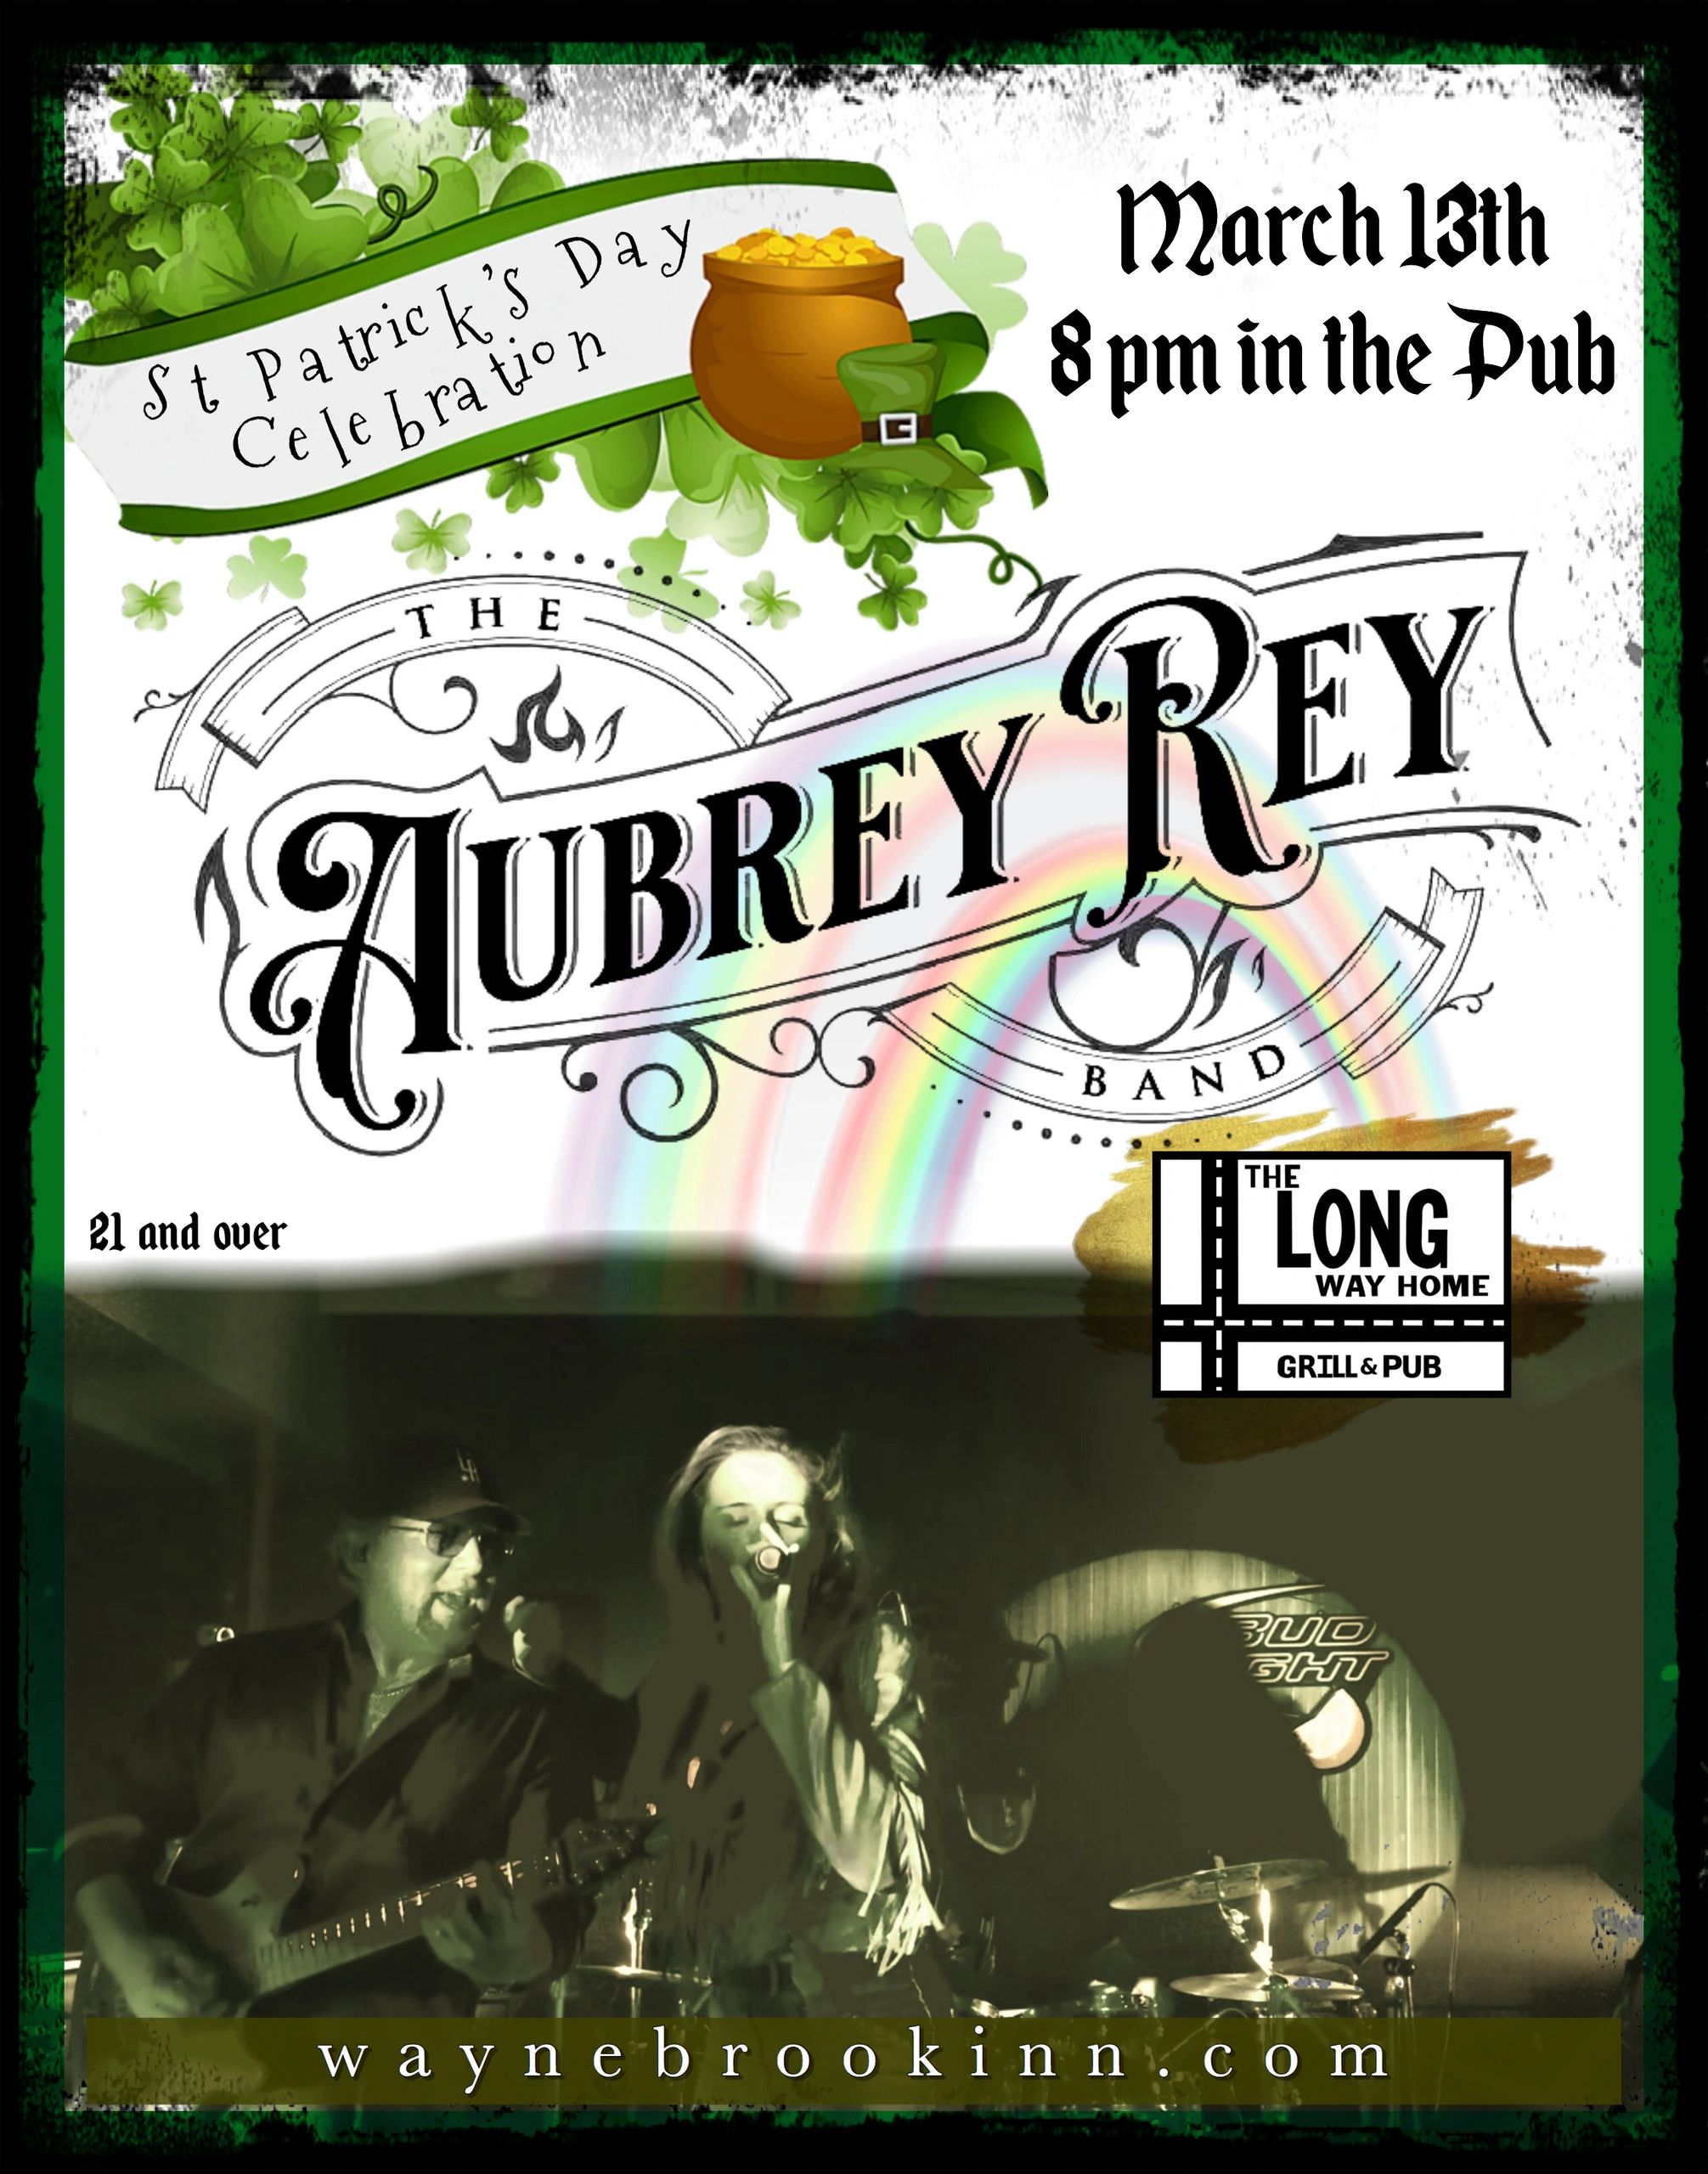 Aubrey Rey Saint Patrick's Day Party in Honey Brook. Live music in the pub.